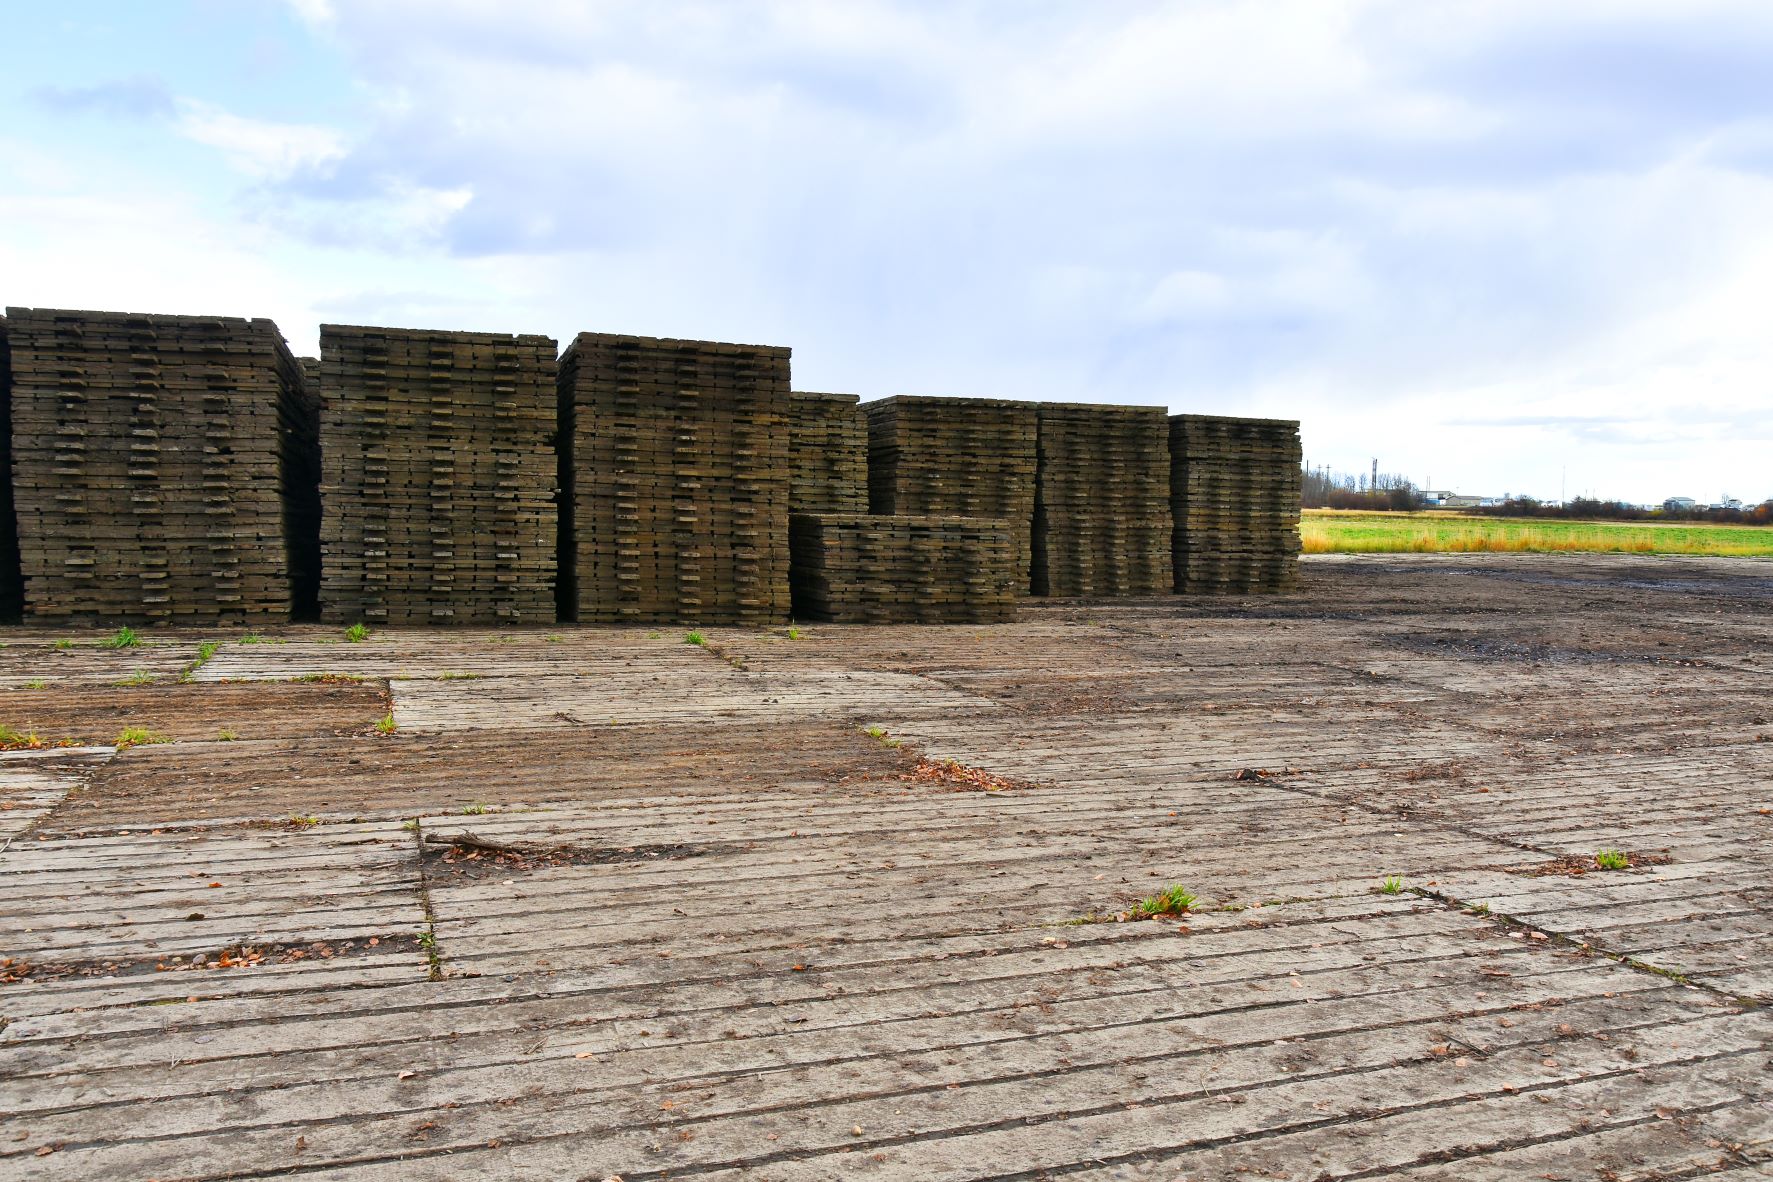 An image of wooden swamp mats used to create temporary road access and preserve the environment.